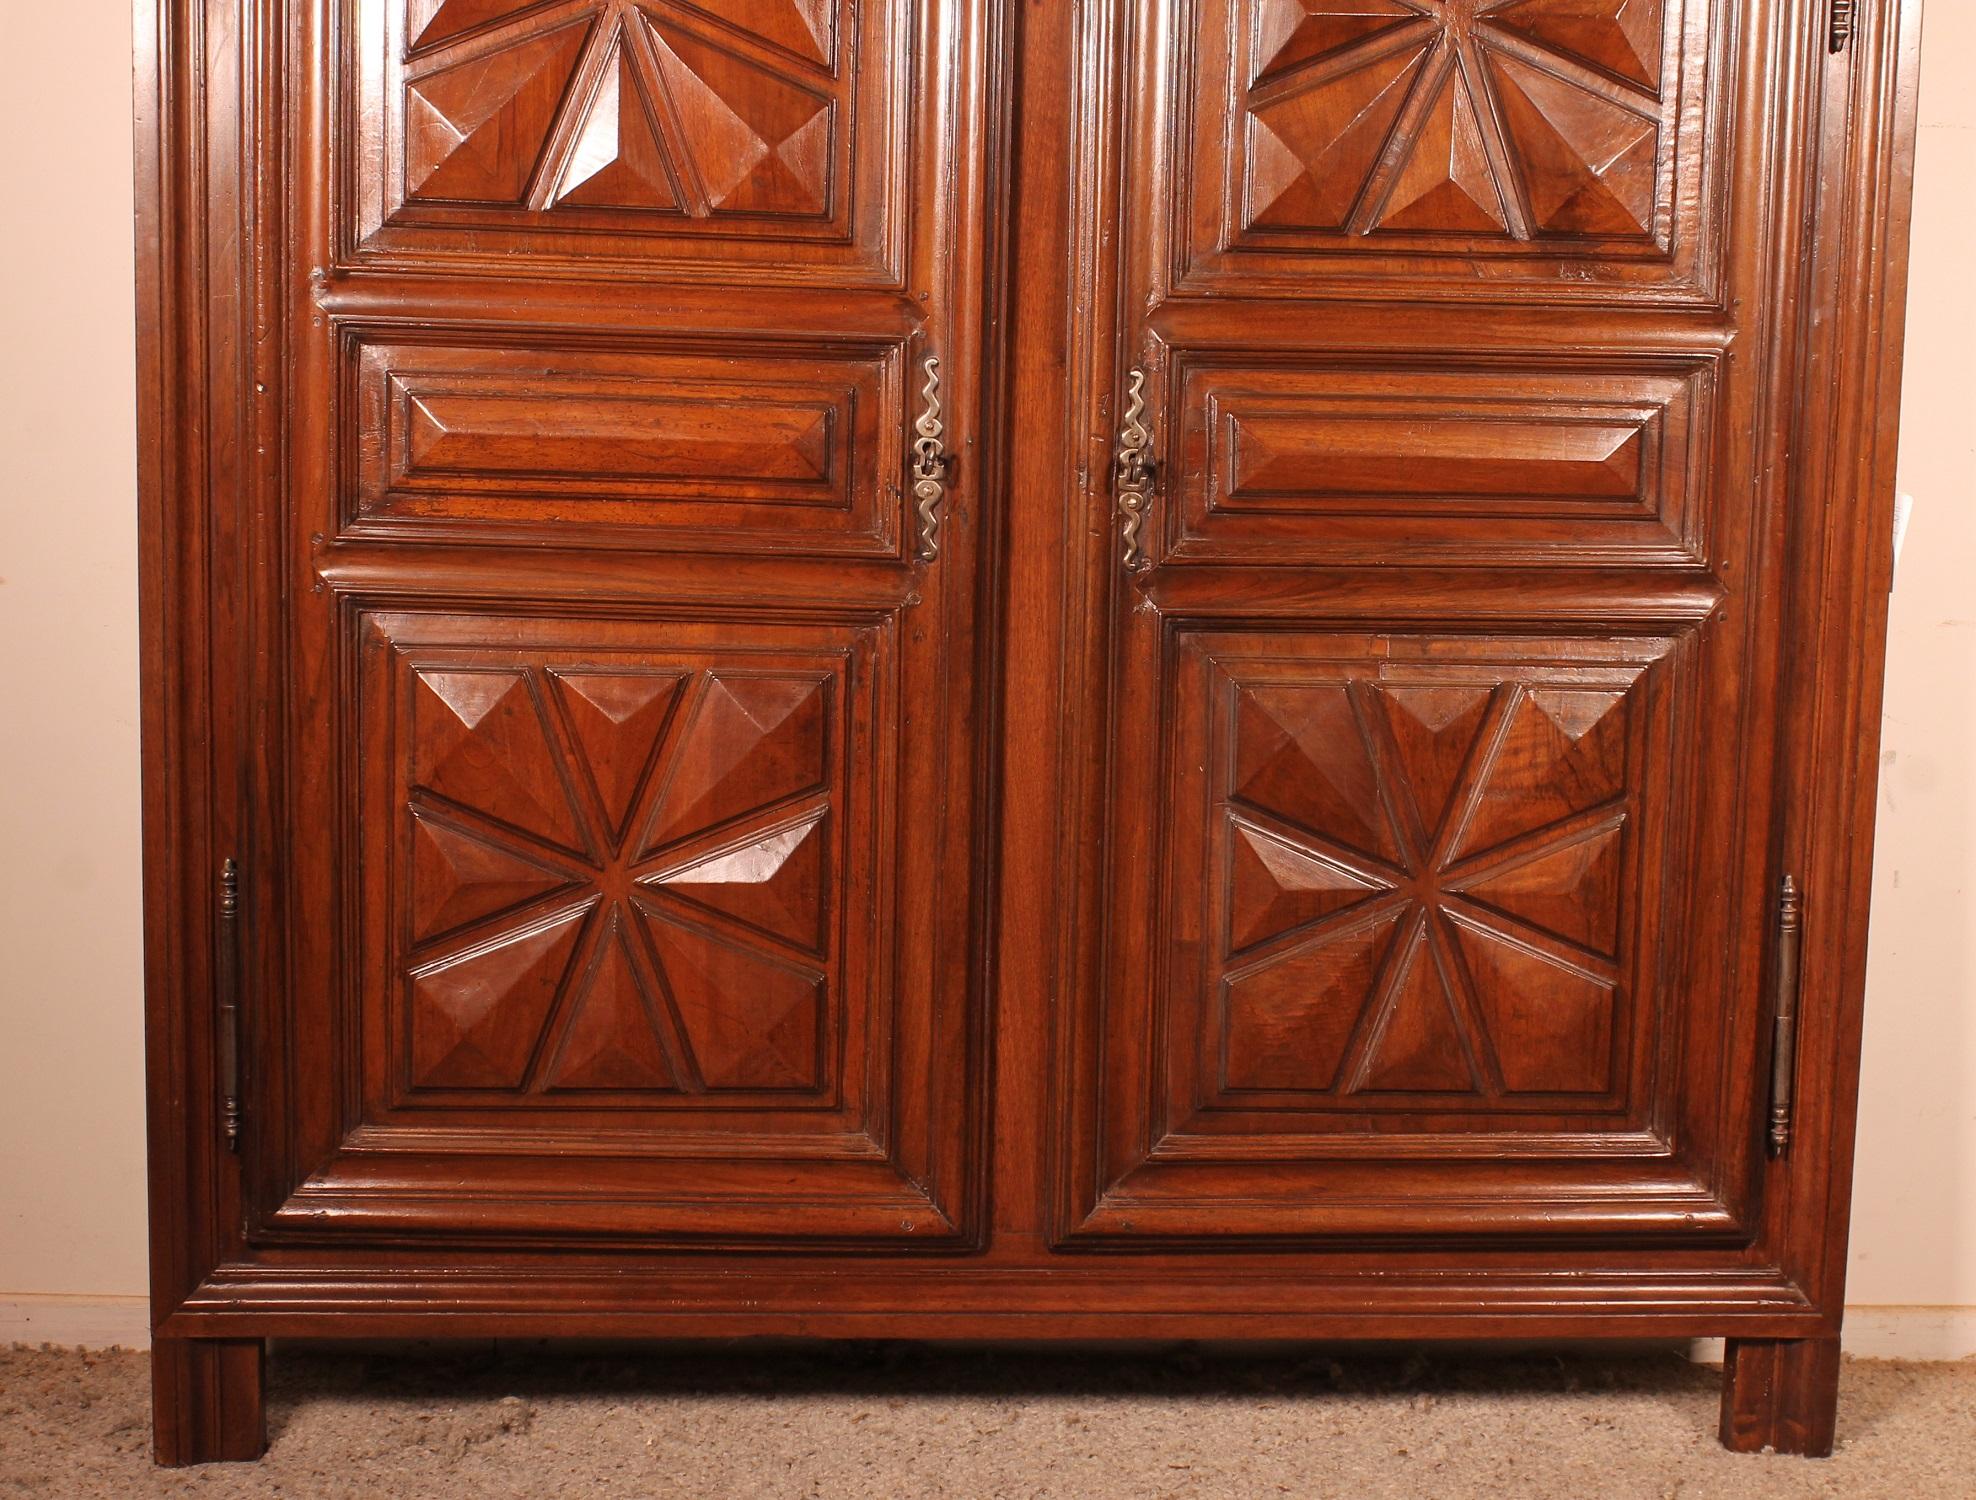 Closed in walnut from the 17th century with diamond tip
Very beautiful front closet which has the Maltese cross on their top and bottom panels which is rare
It is in perfect condition and has its two keys that work
Superb patina and very